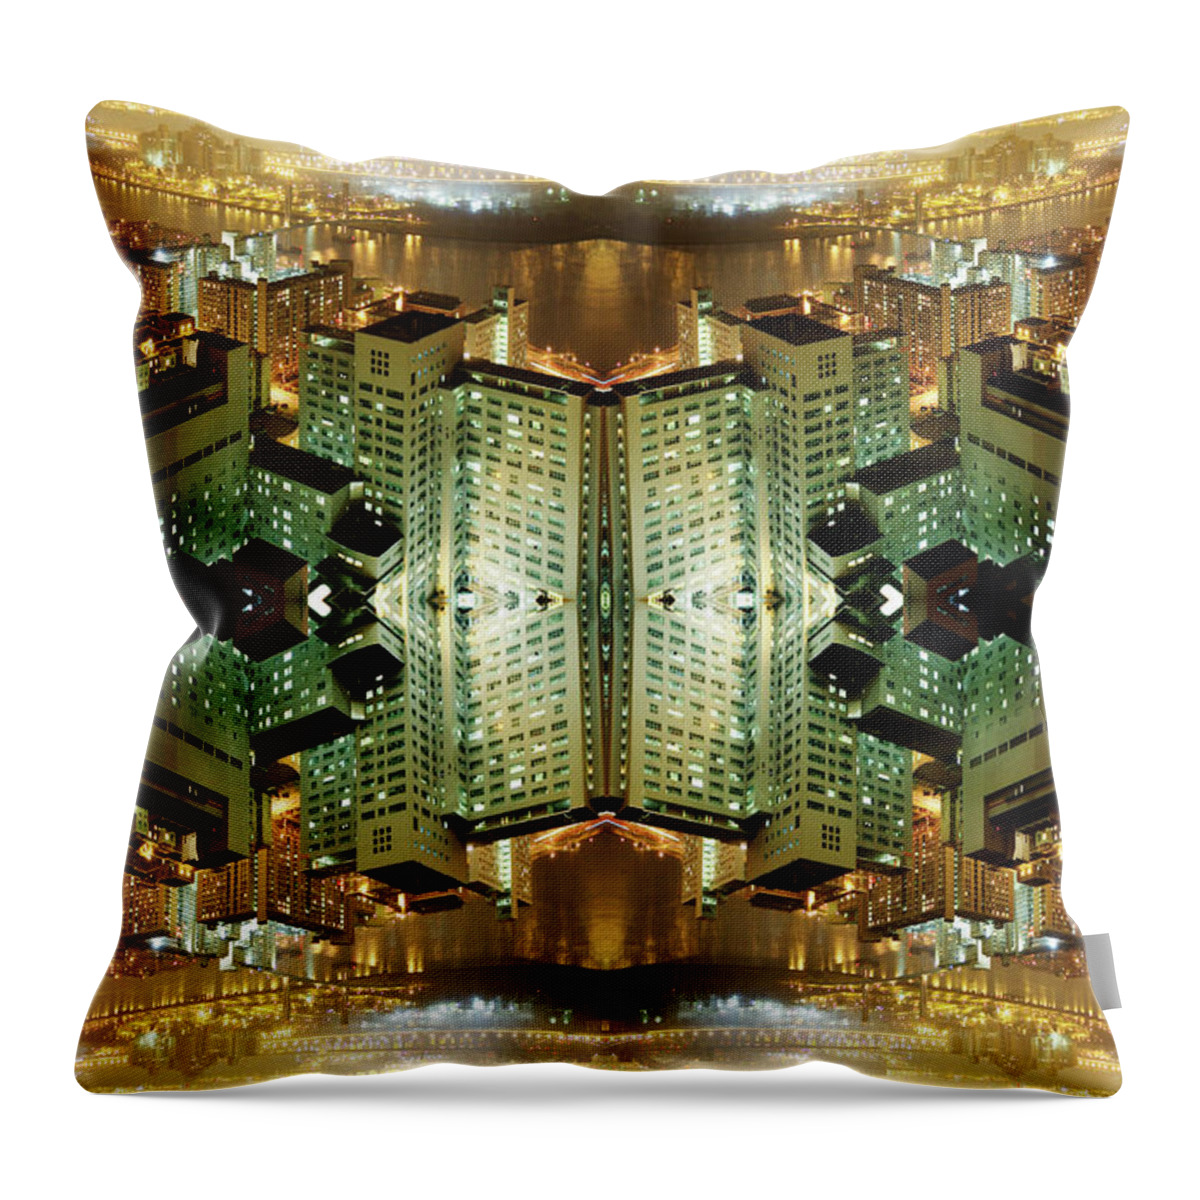 Downtown District Throw Pillow featuring the photograph Surreal New York City At Night by Silvia Otte